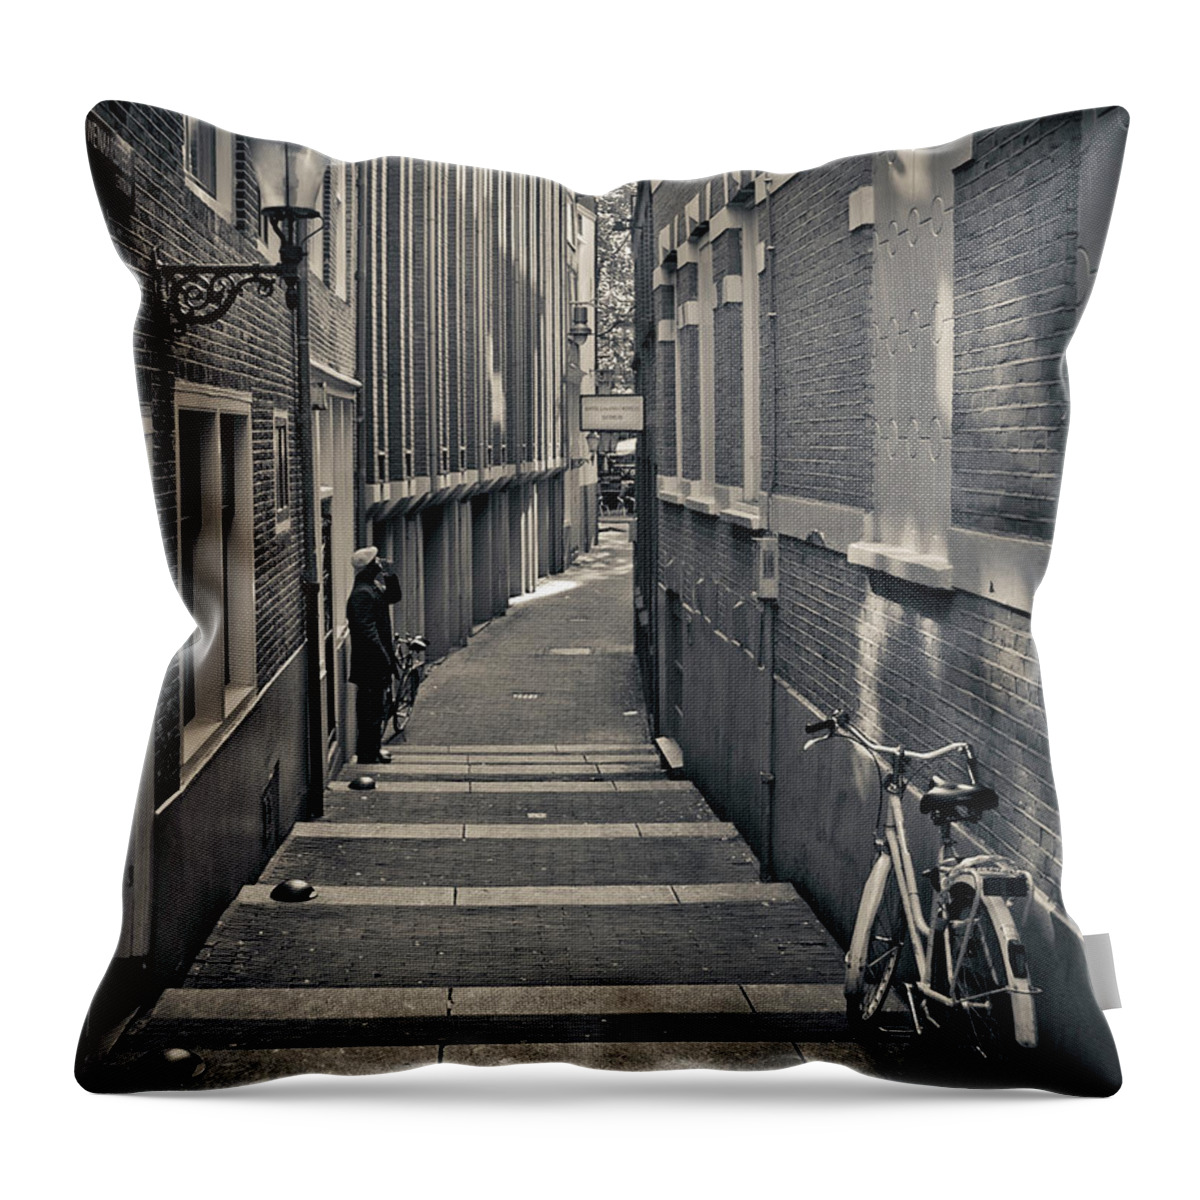 3scape Photos Throw Pillow featuring the photograph Amsterdam by Adam Romanowicz